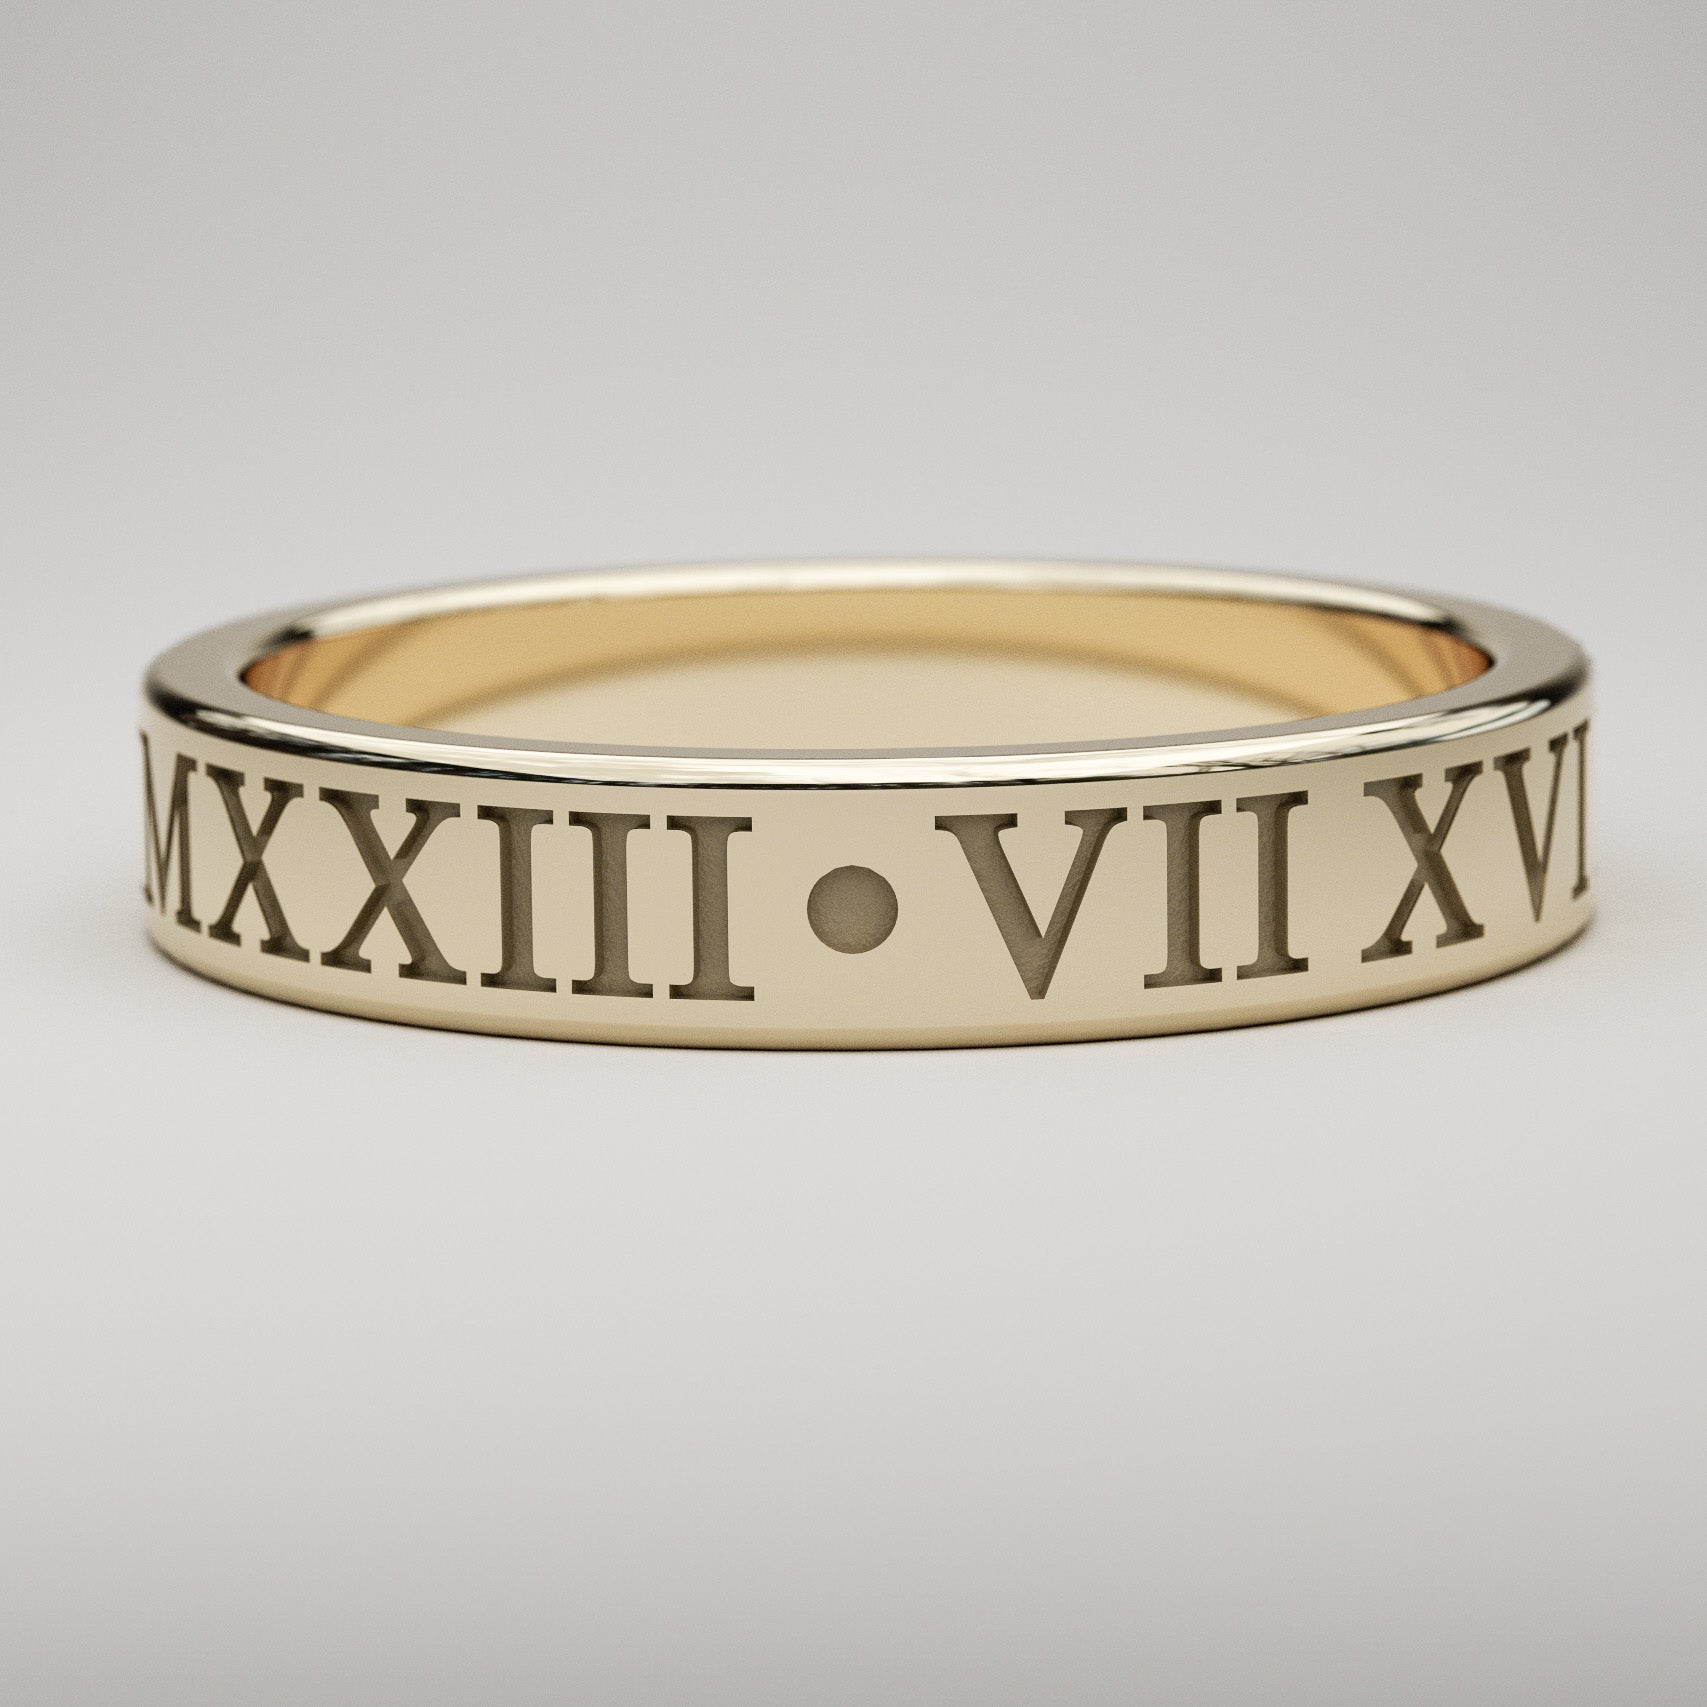 4mm engraved style custom Roman Numeral date ring in yellow gold